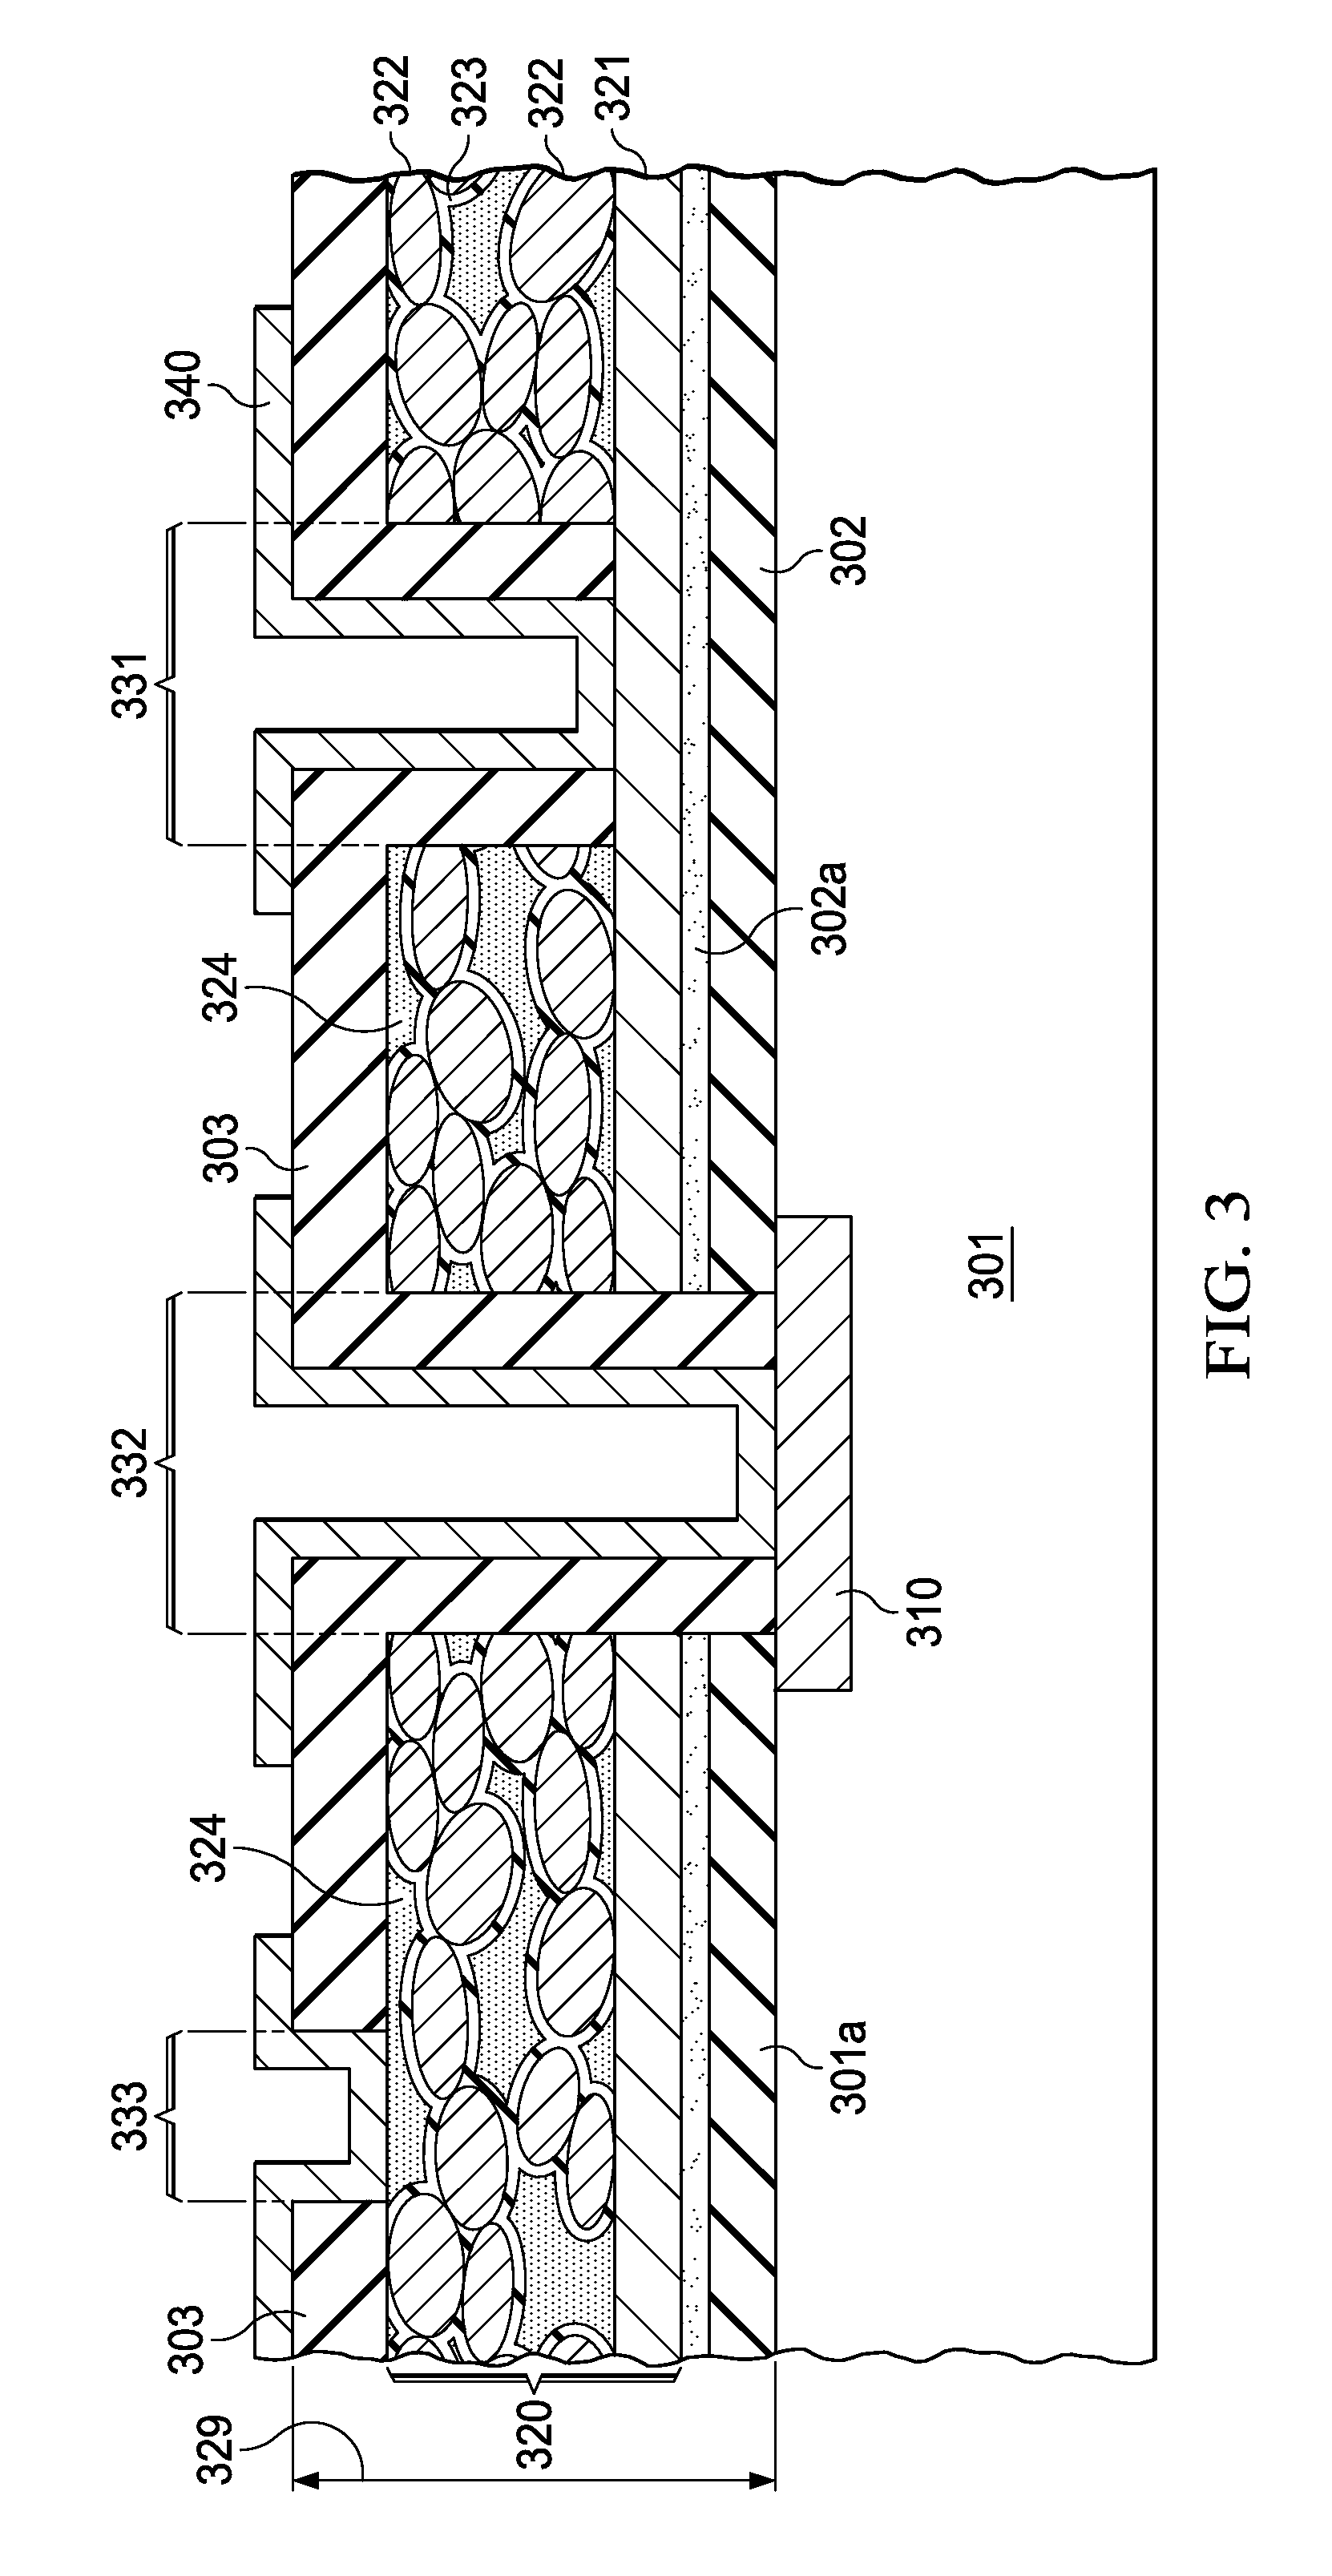 Conductive through-polymer vias for capacitative structures integrated with packaged semiconductor chips